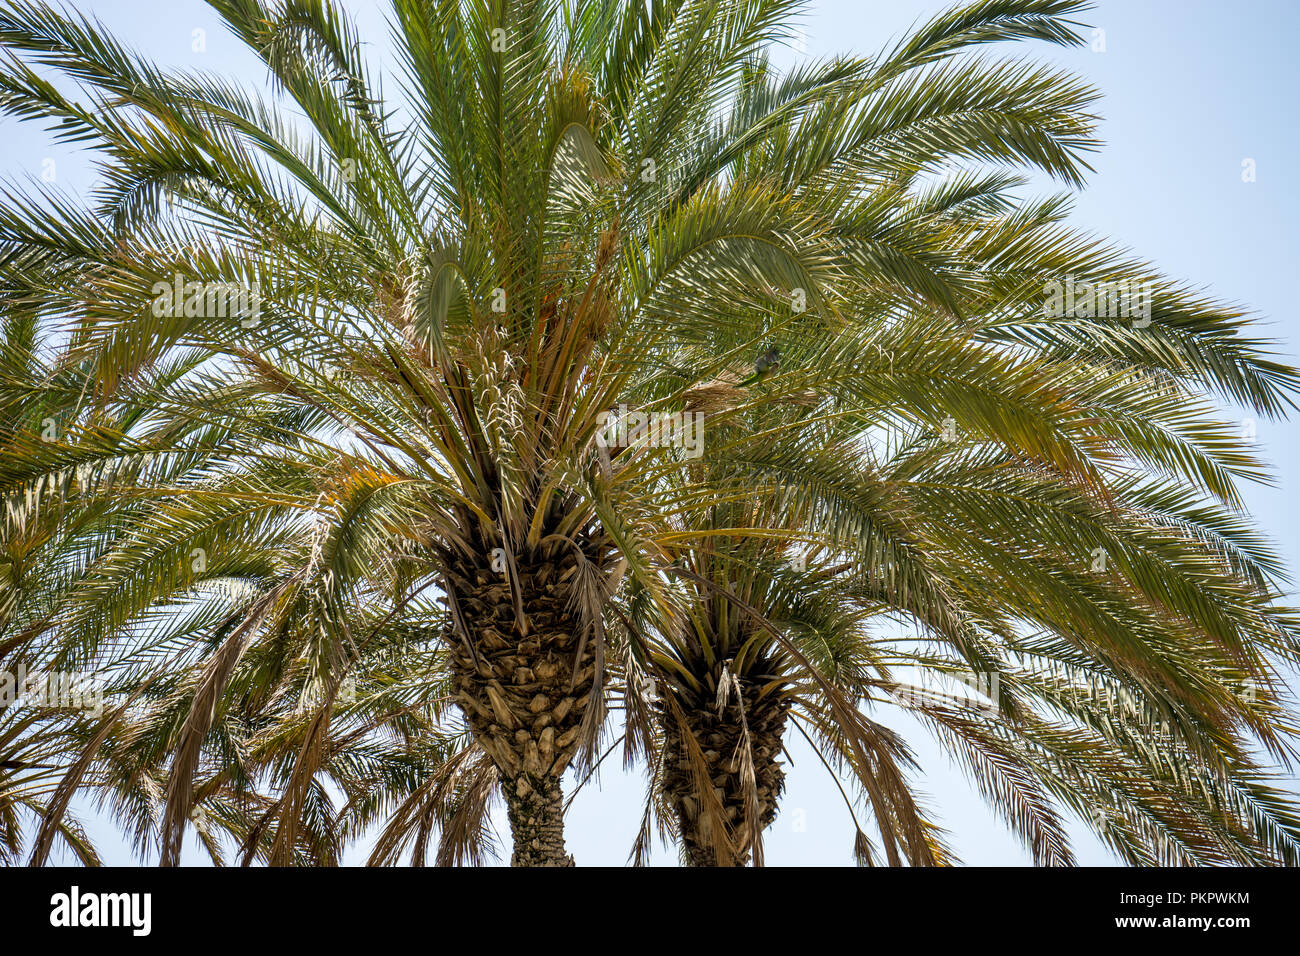 Spain, Malaga, Europe,  a group of palm trees next to a tree Stock Photo